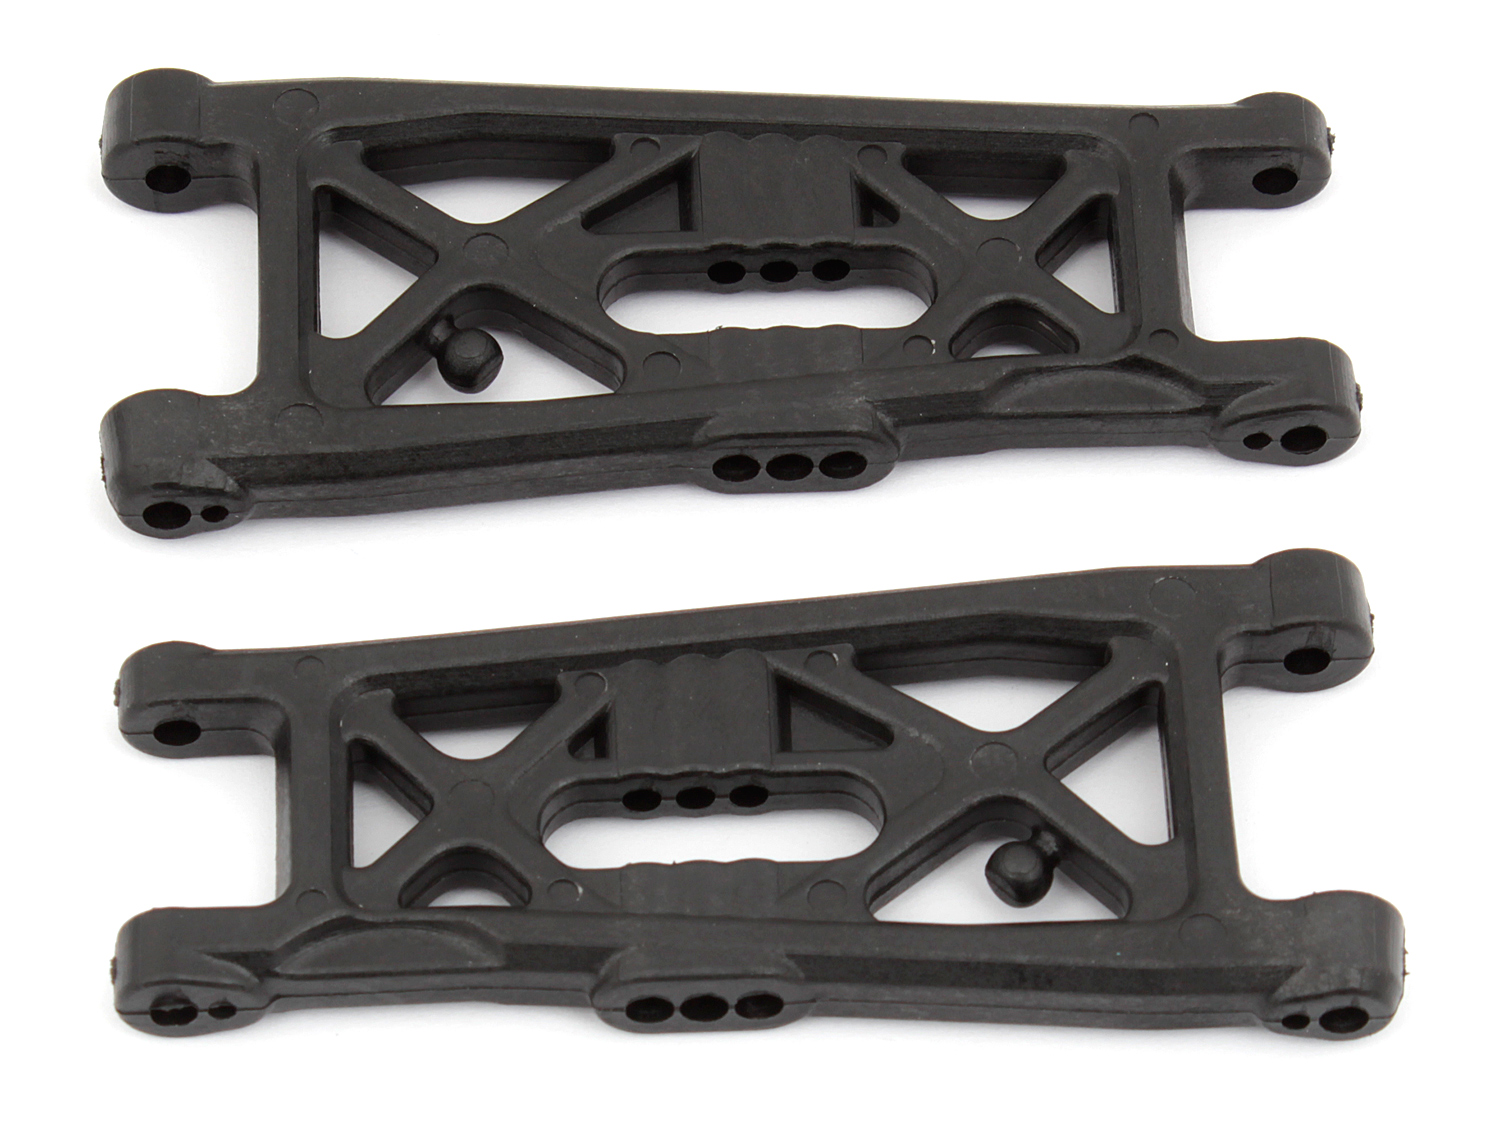 RC10B6 Flat Front Suspension Arms